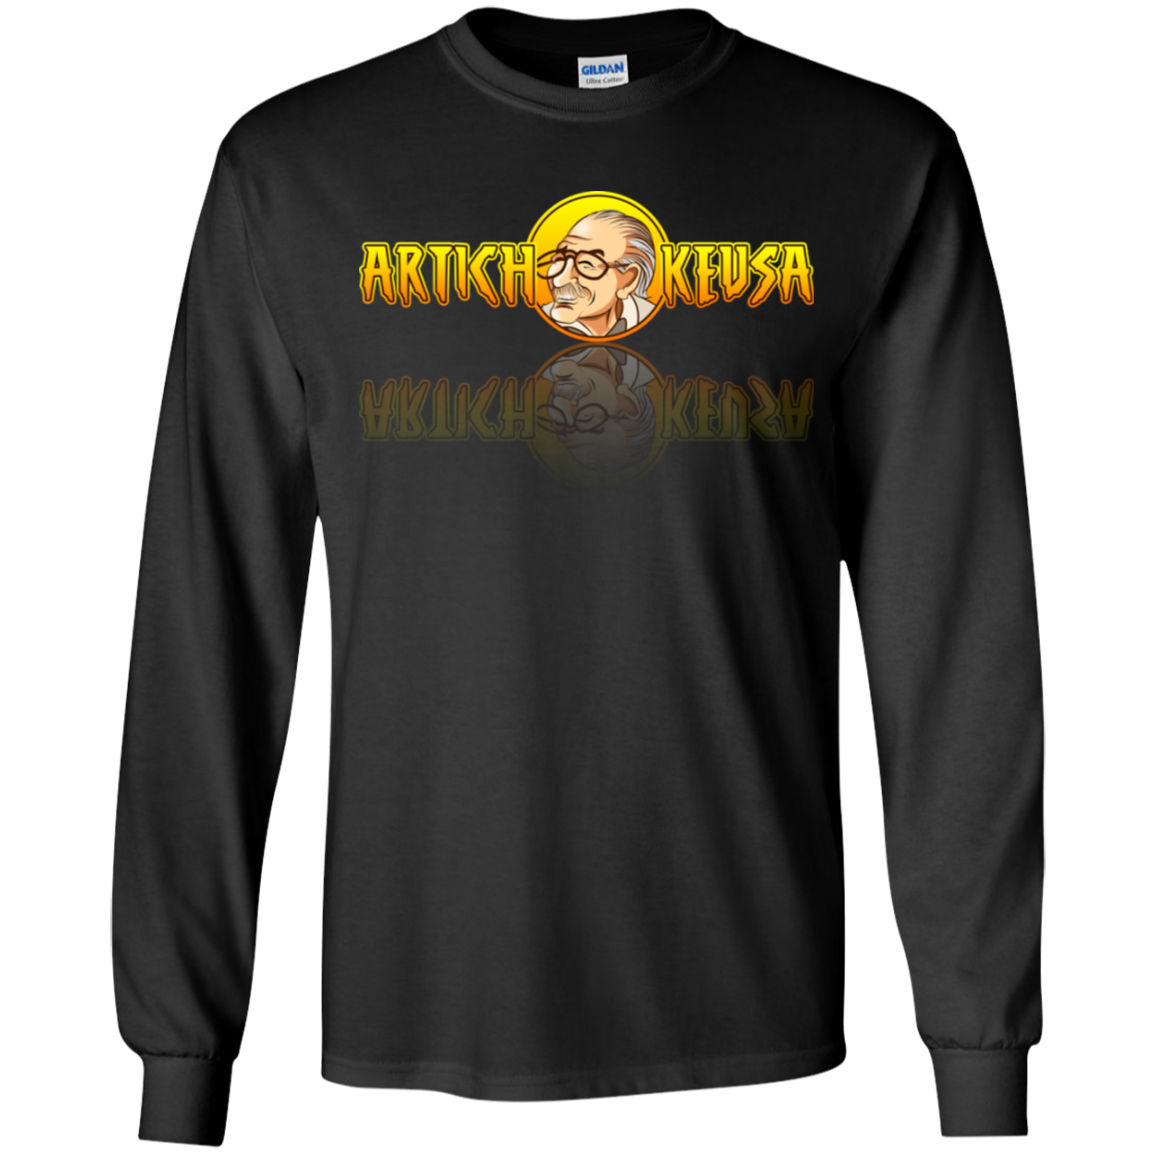 ArtichokeUSA Character and Font design. Stan Lee Thank You Fan Art. Let's Create Your Own Design Today. Youth Long Sleeve T-Shirt